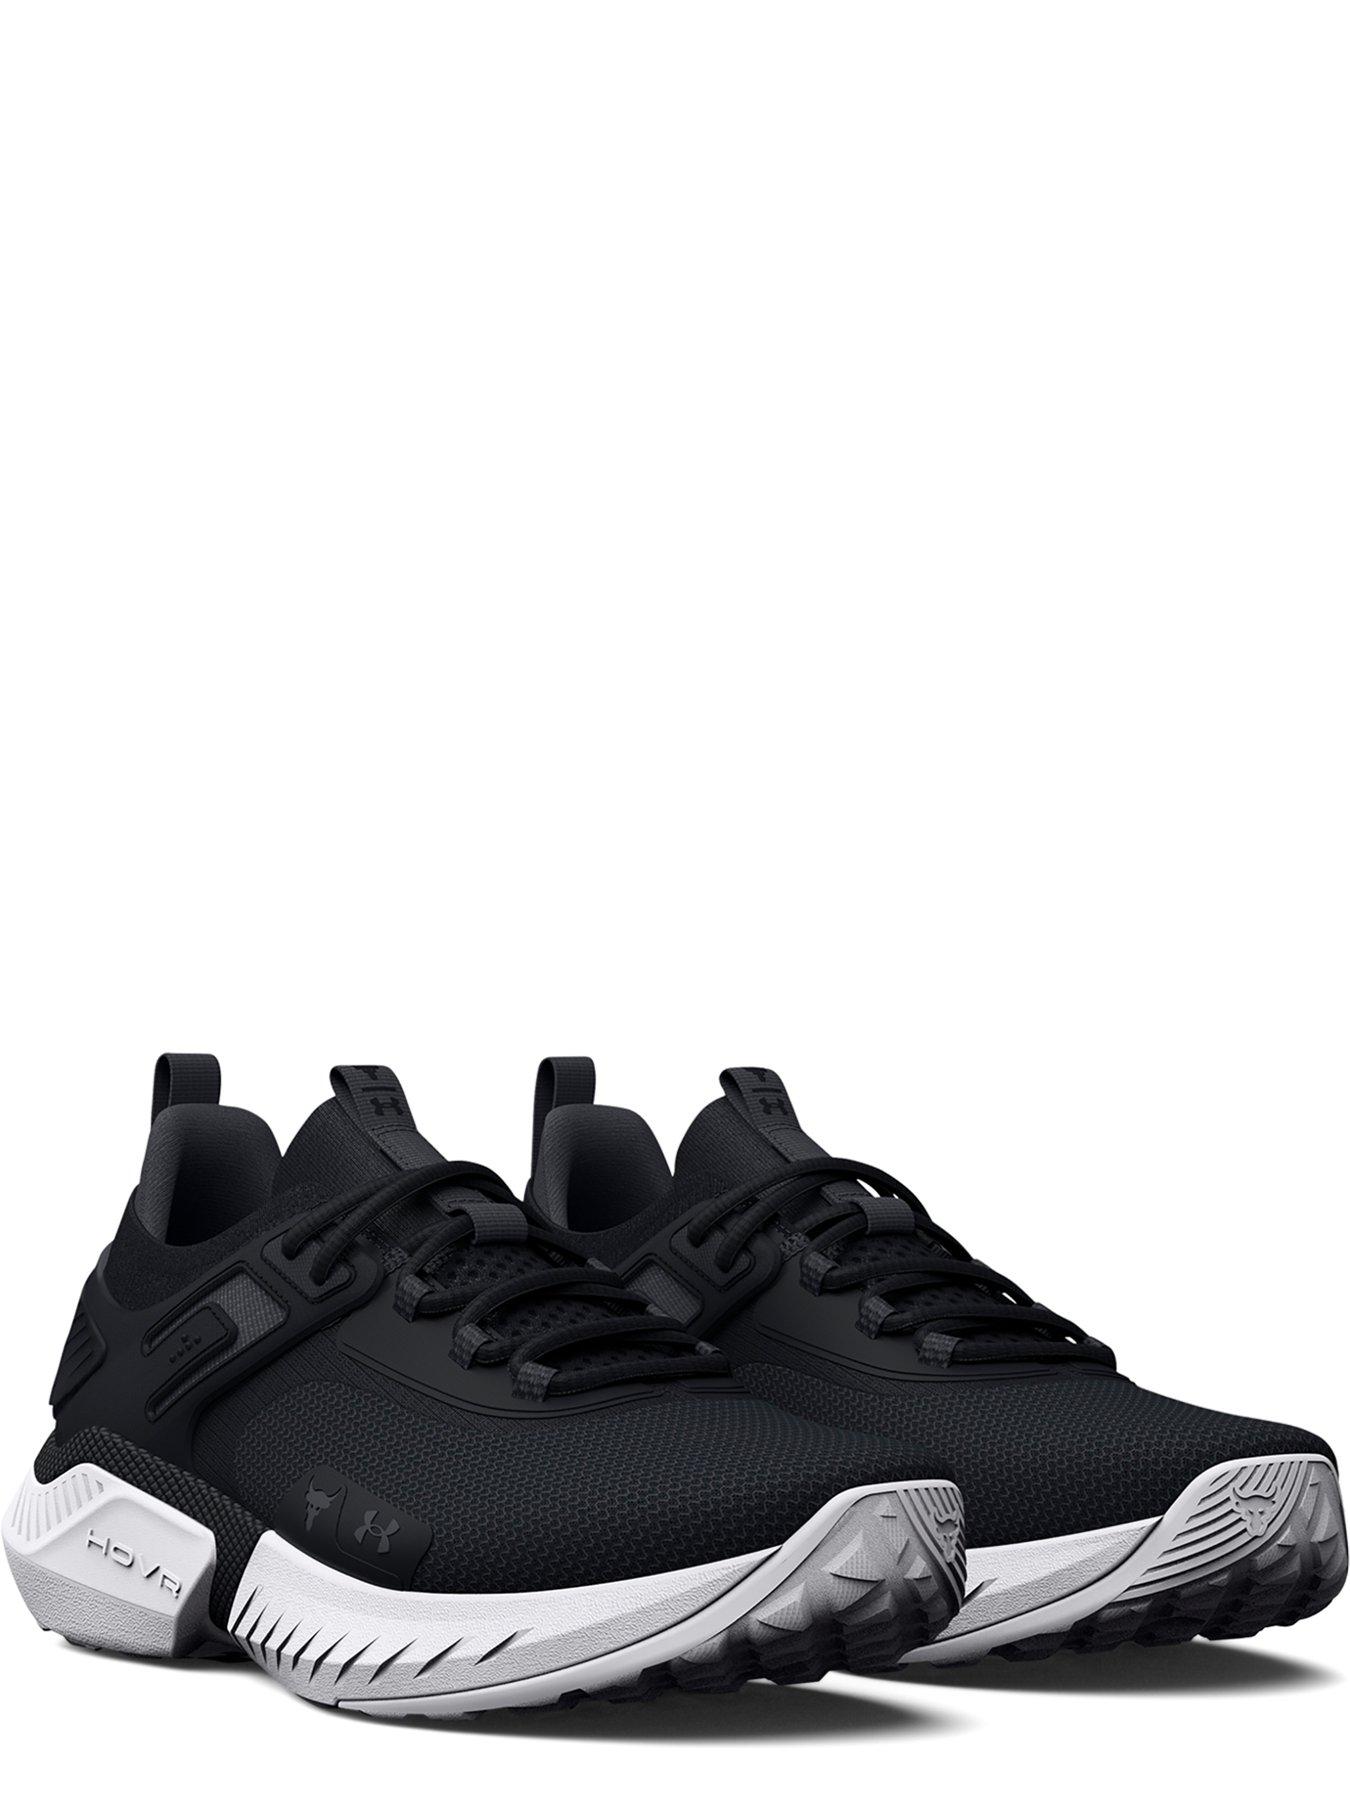 UNDER ARMOUR Project Rock 5 - Black/White